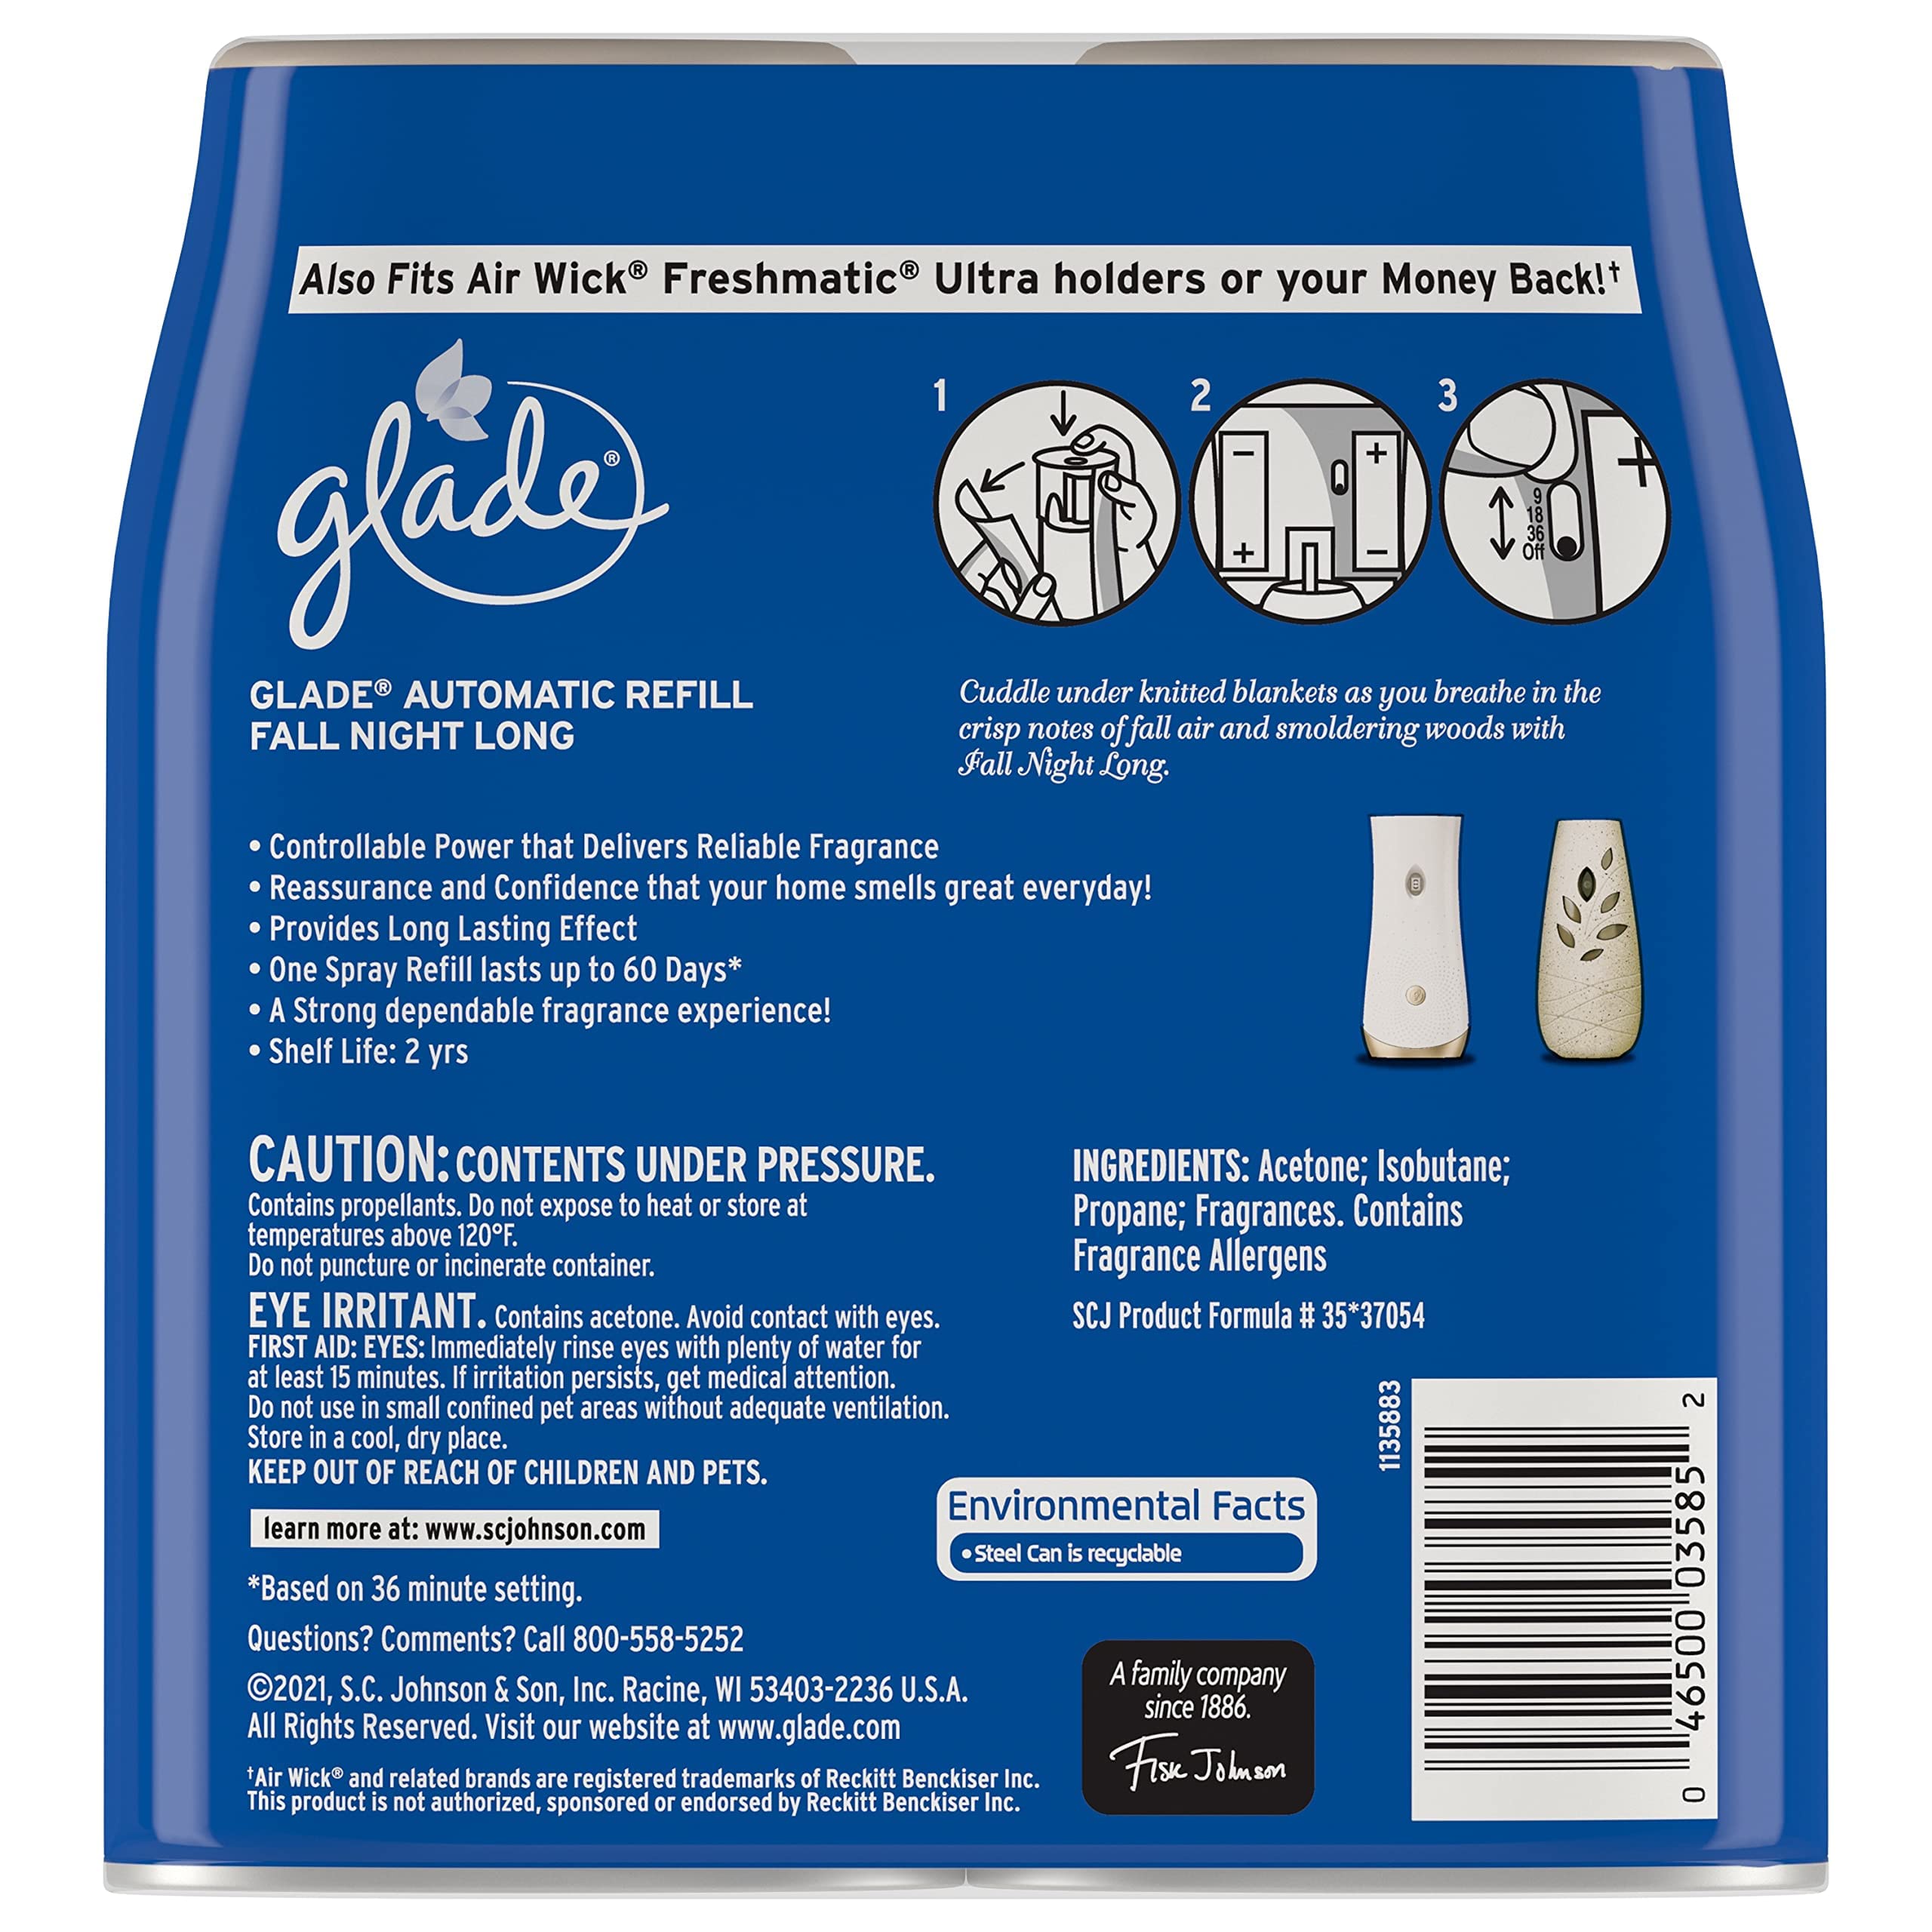 Glade Automatic Spray Refill, Air Freshener for Home and Bathroom, Fall Night Long, 6.2 Oz, 2 Count